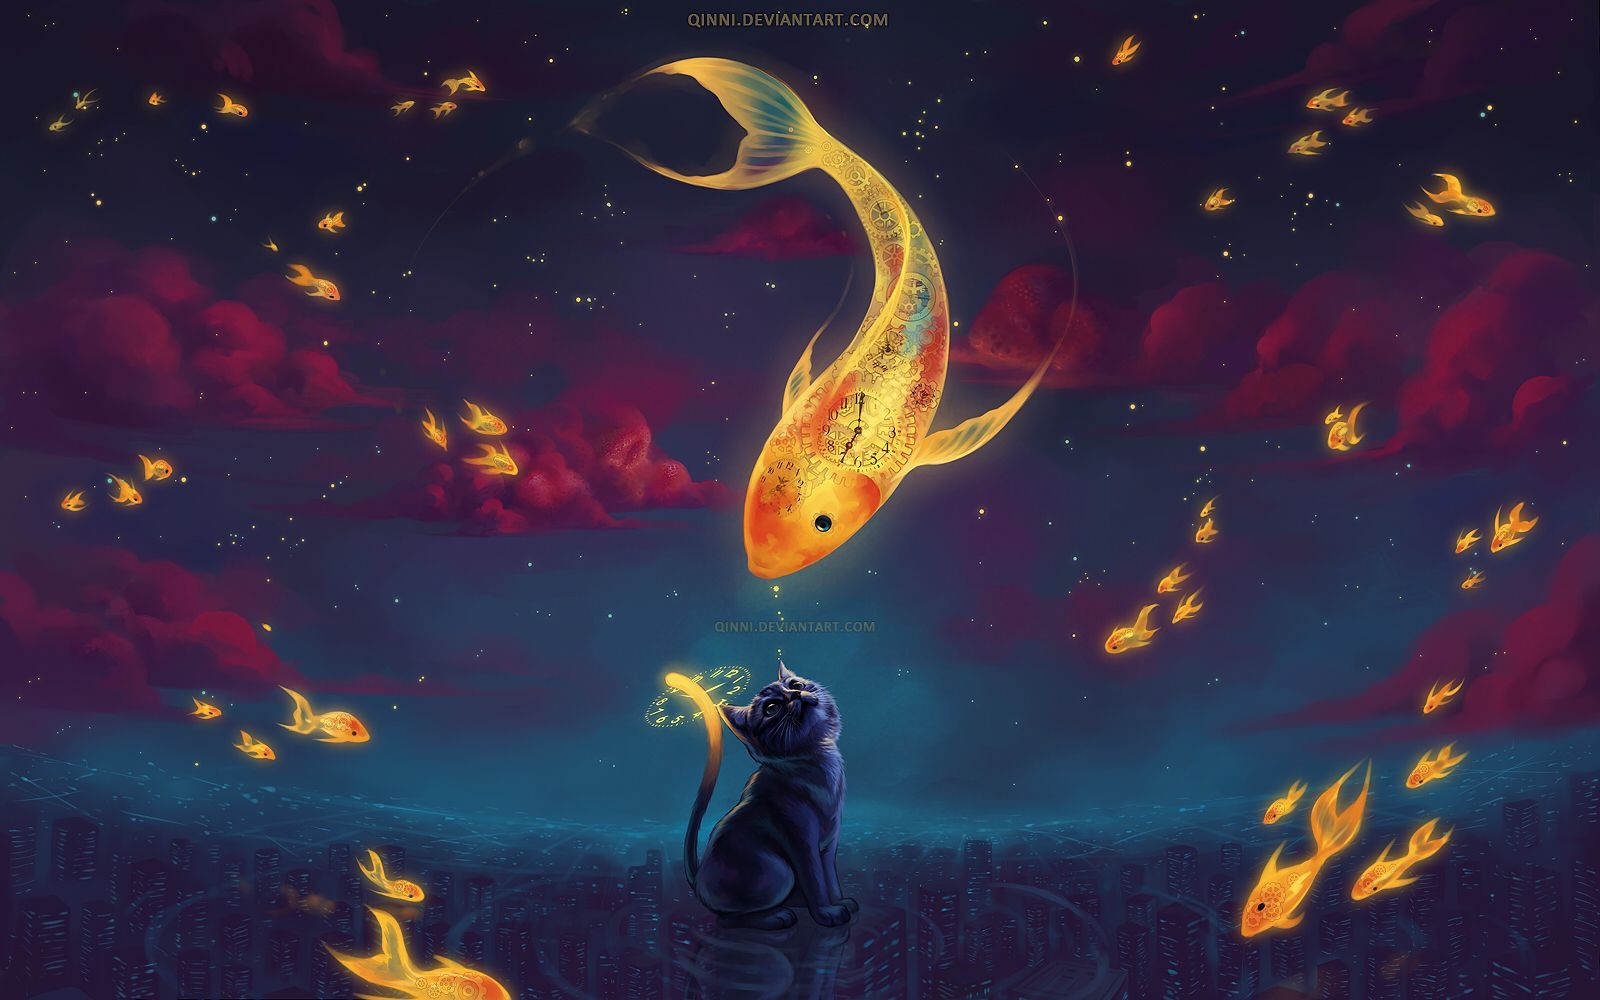 To Catch The Moonfish by Qinni. Cat art, Art, Cross paintings